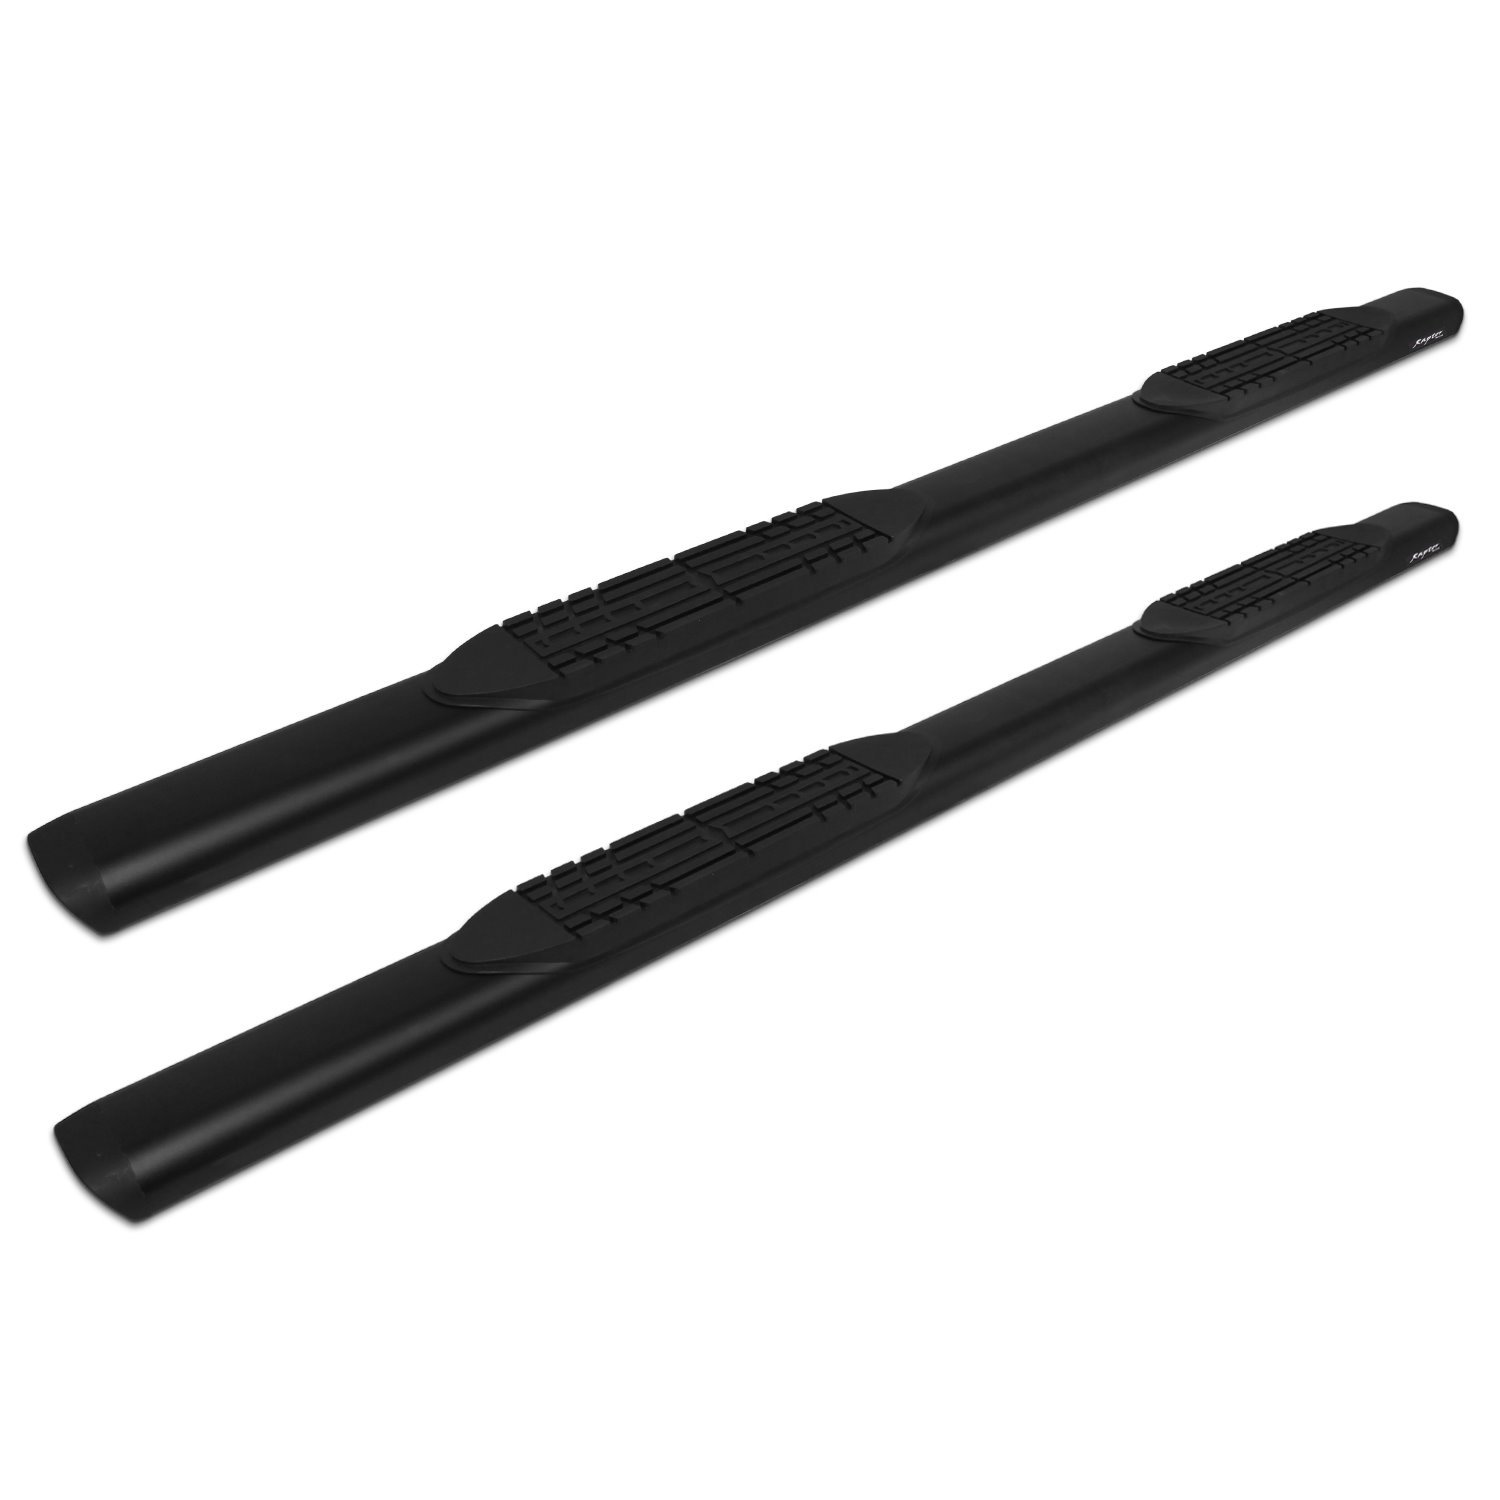 2001-0041BT 5 in Oval Style Slide Track Running Boards, Black Aluminum, Fits Select Chevy Silverado/GMC Sierra 1500/2500/3500